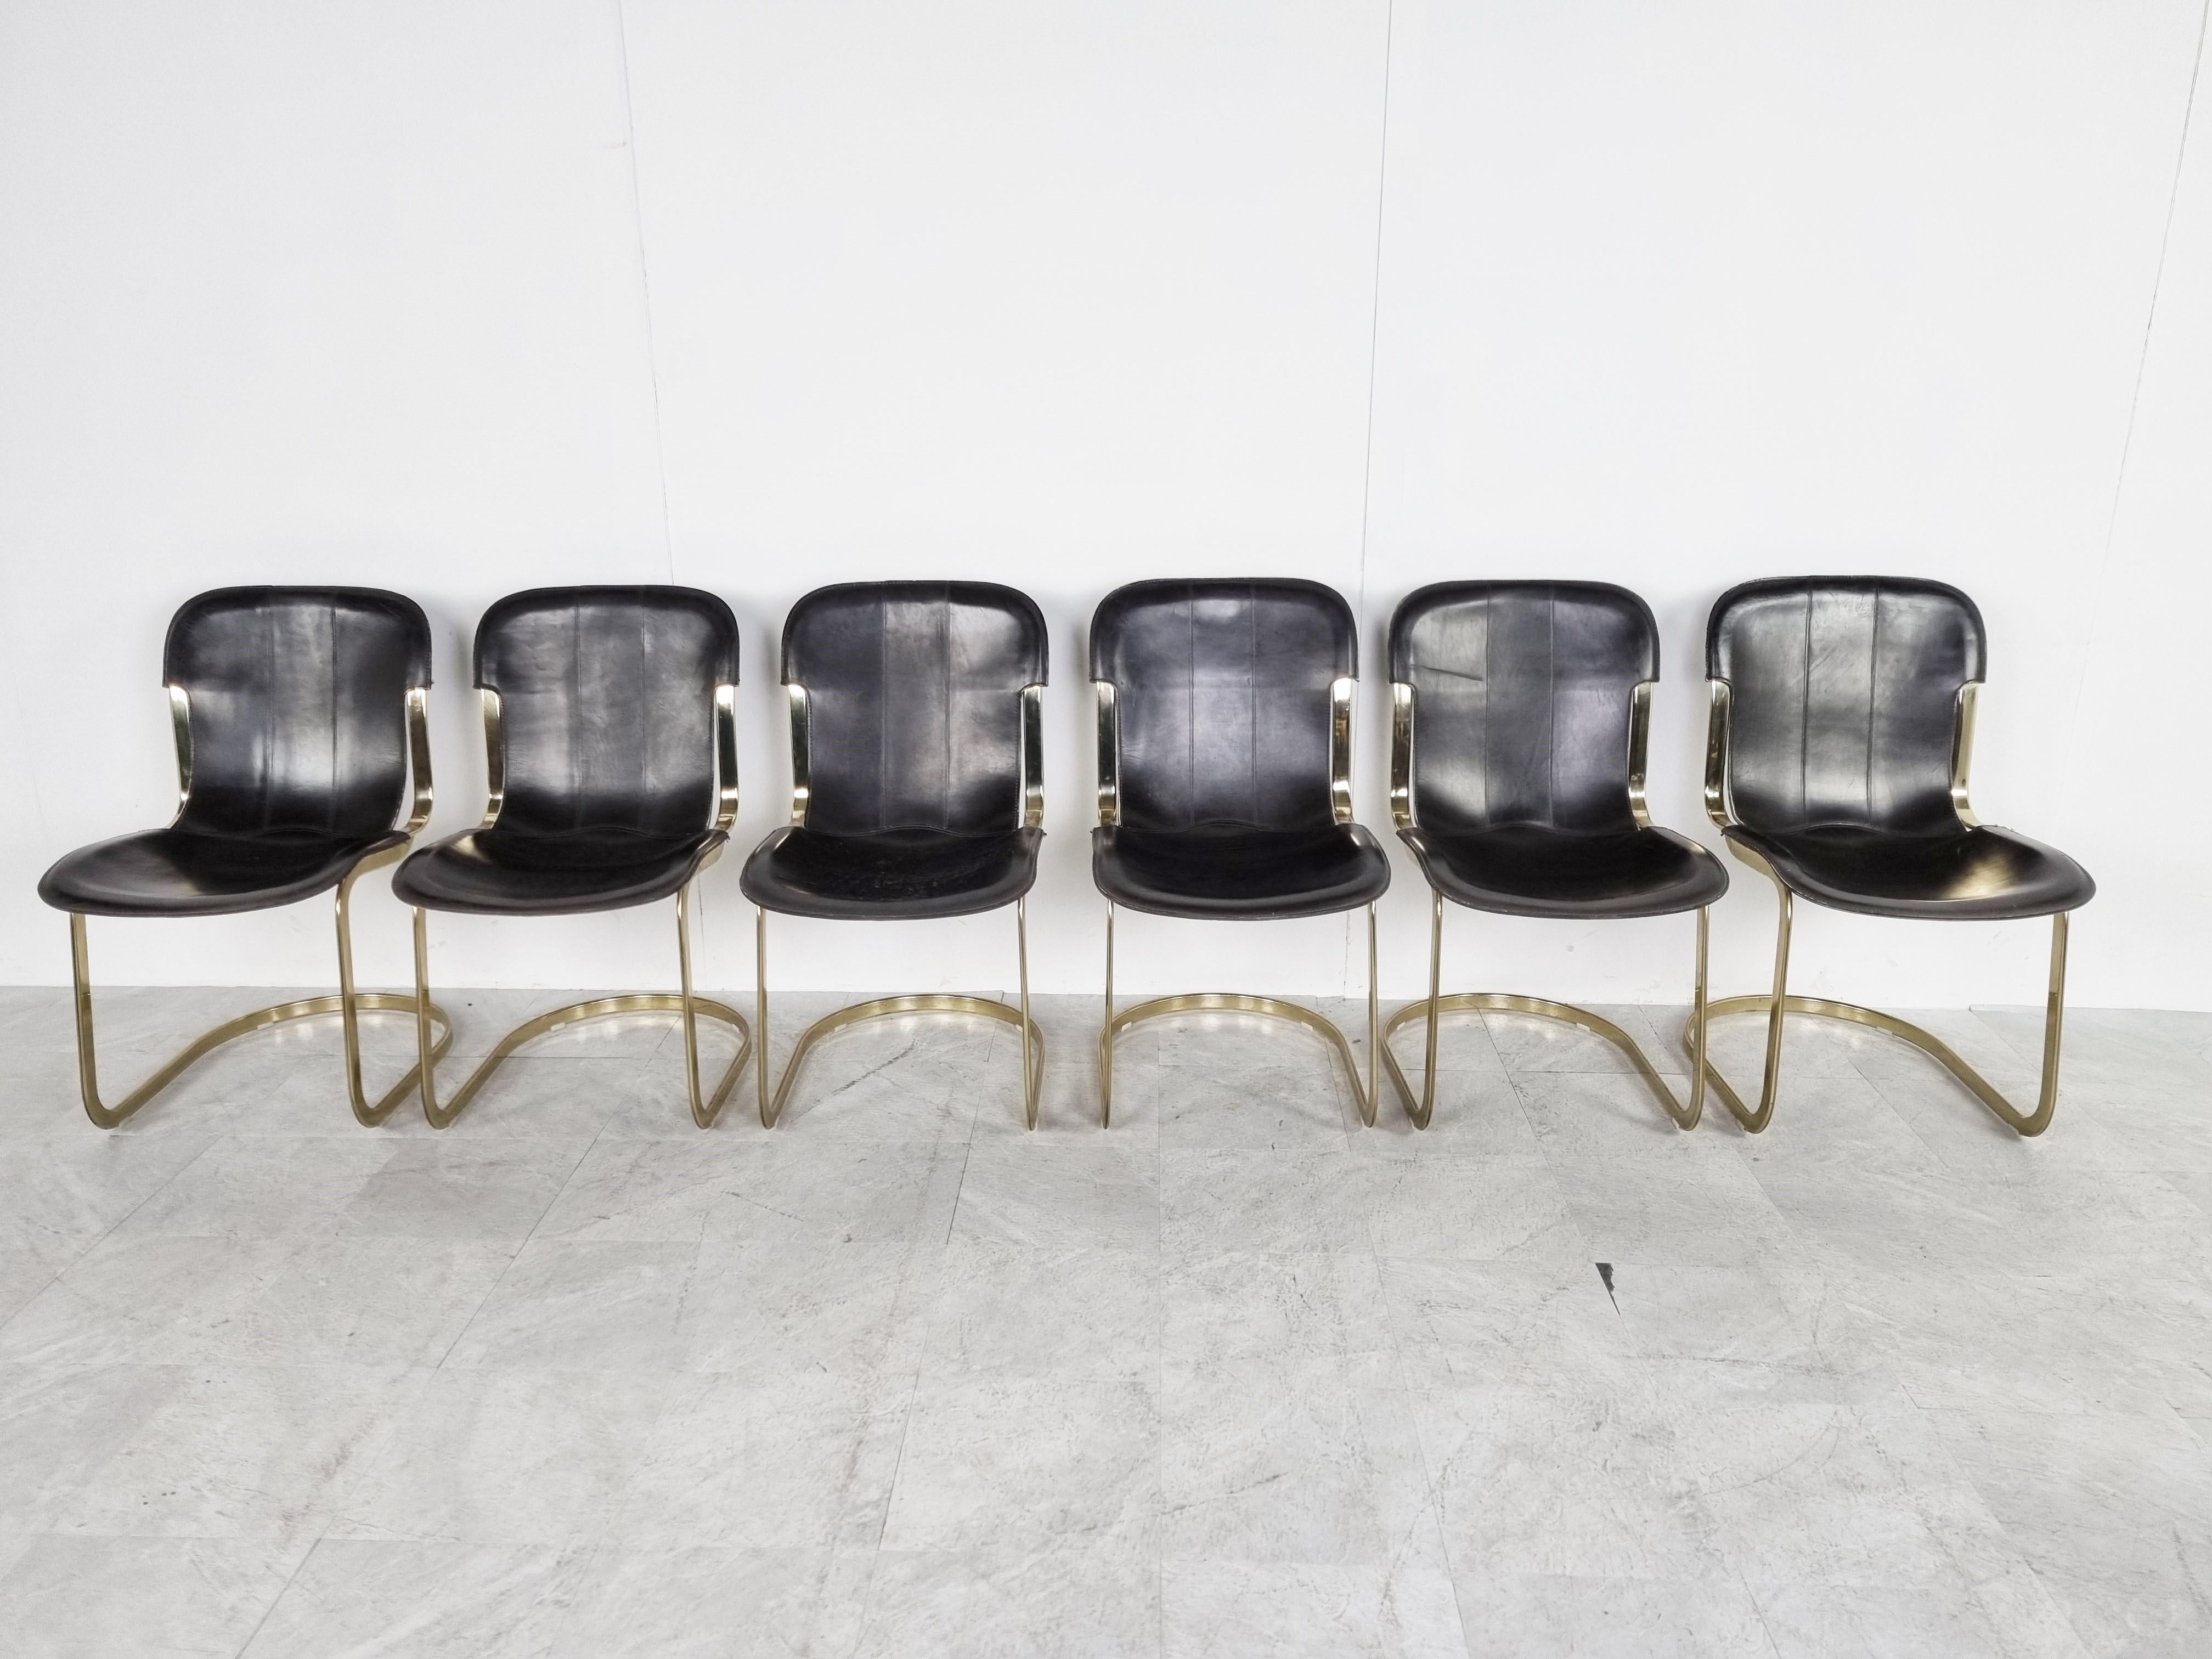 Set of 6 dining chairs designed by Willy Rizzo for Cidue (model C2).

The chairs have a beautifully shaped brass frame and come with the original dark brown leather seats.

Rare to find them with brass frames.

Good vintage condition with age